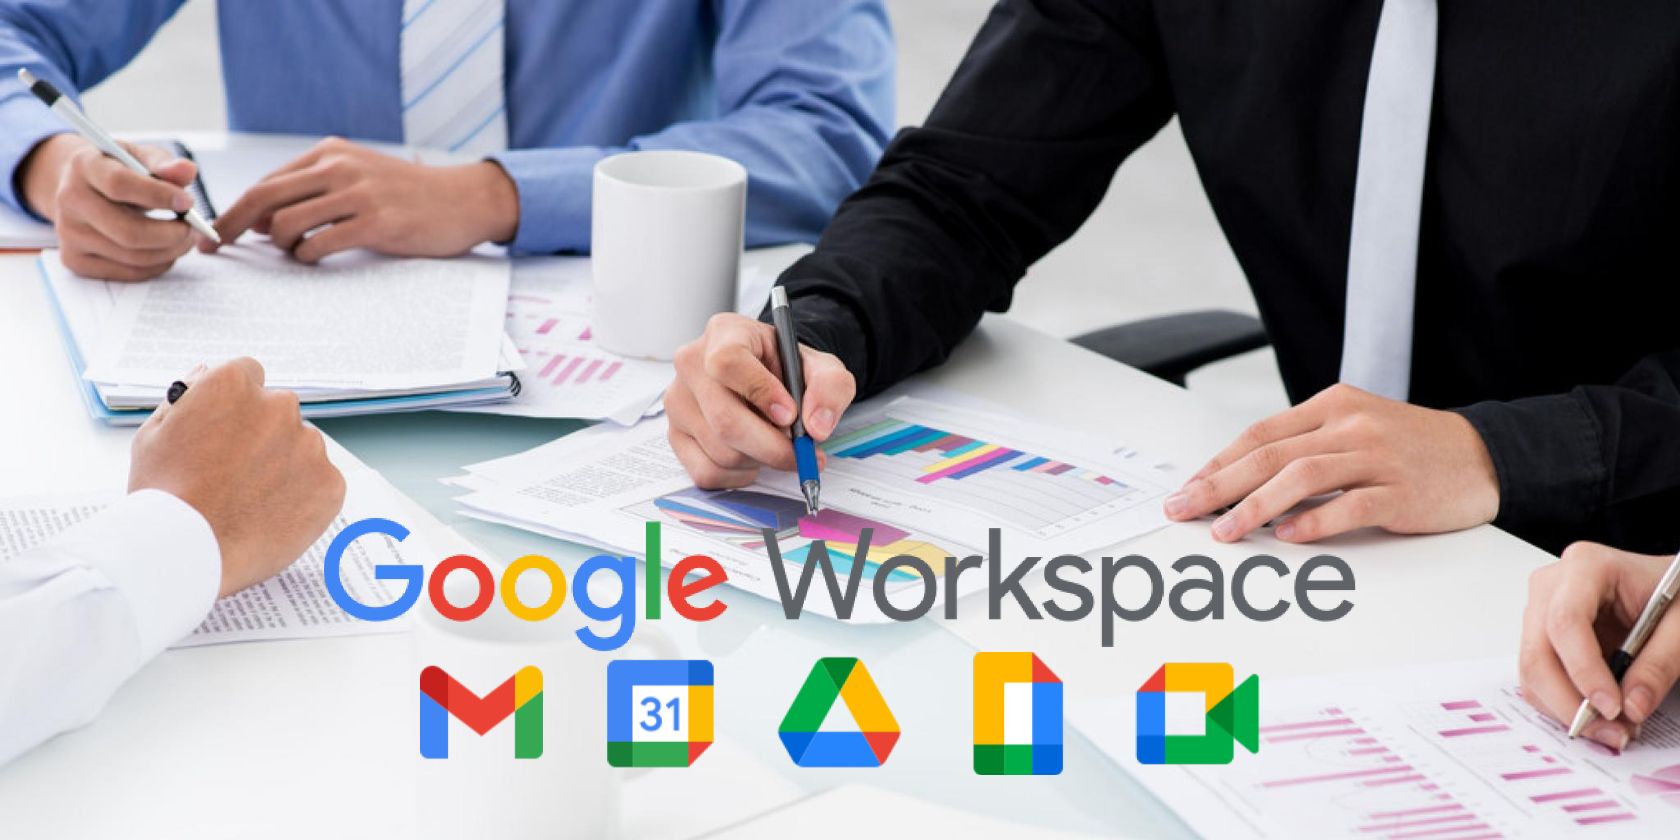 The 8 Best Google Workspace Add-Ons for Task Management